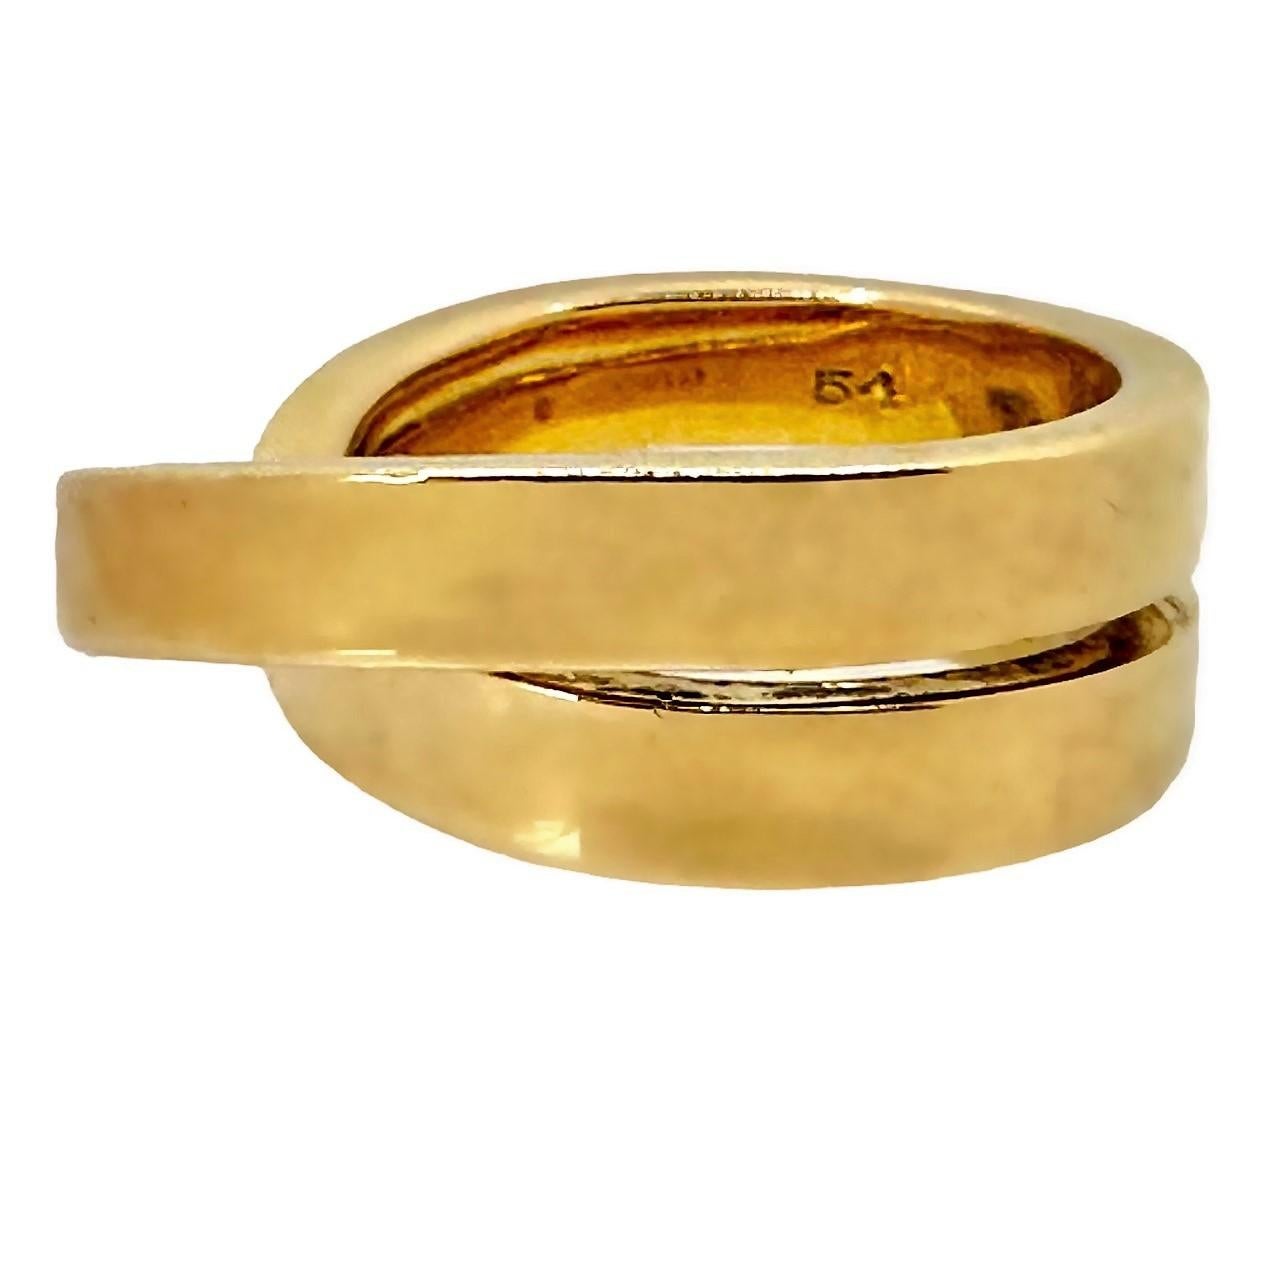 This dynamic and interesting Nouvelle Vague ring is a somewhat unusual offering from this venerated house. Consisting of one continuous ribbon of high polish, 18K yellow gold that wraps around the finger and arcs up high above the finger. It is